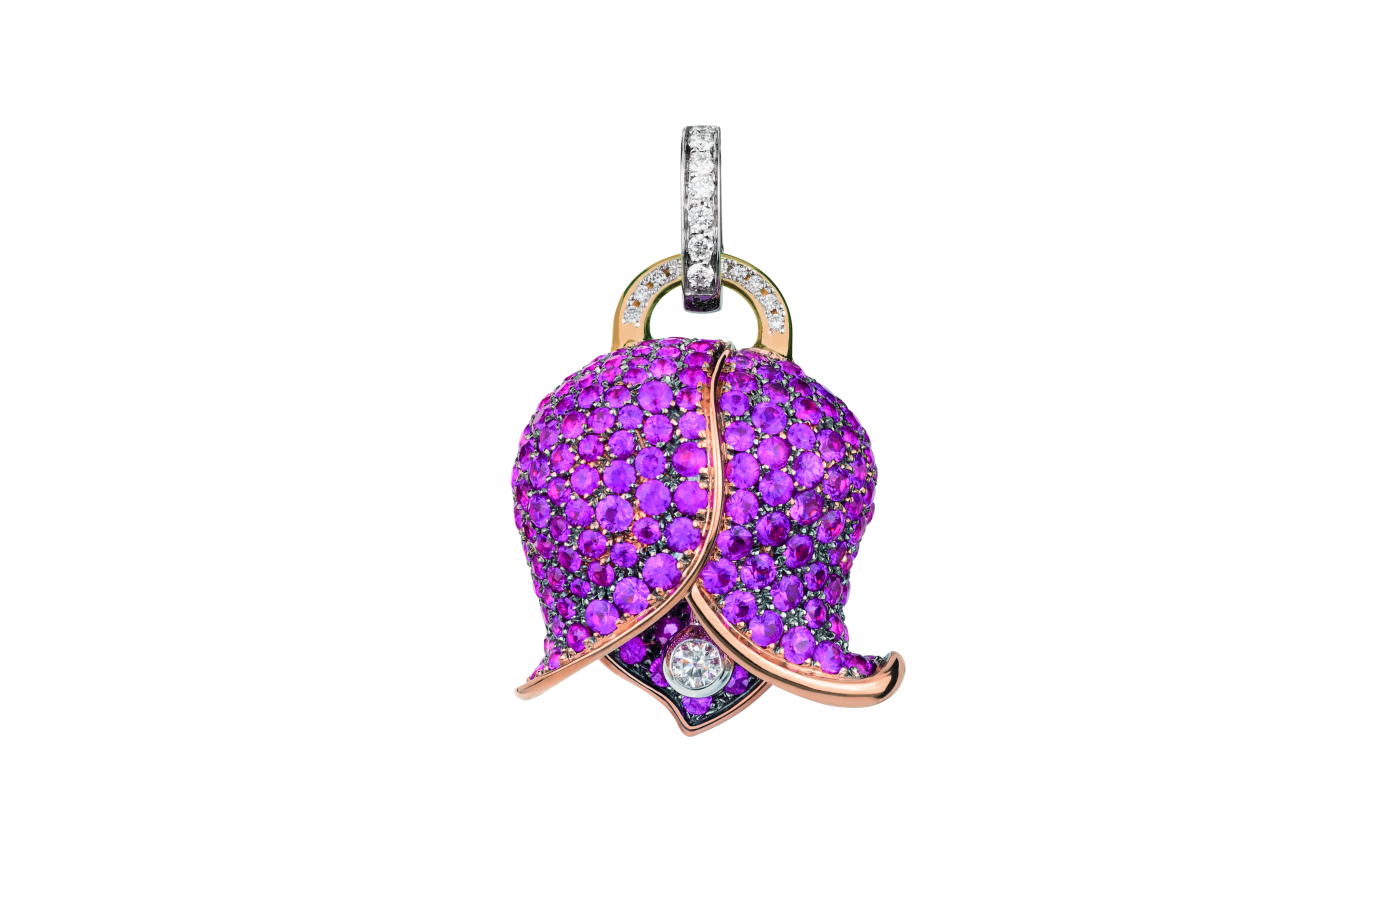 Campanella Bouganville charm in white gold, rose gold, pink sapphire and diamond by Chantecler